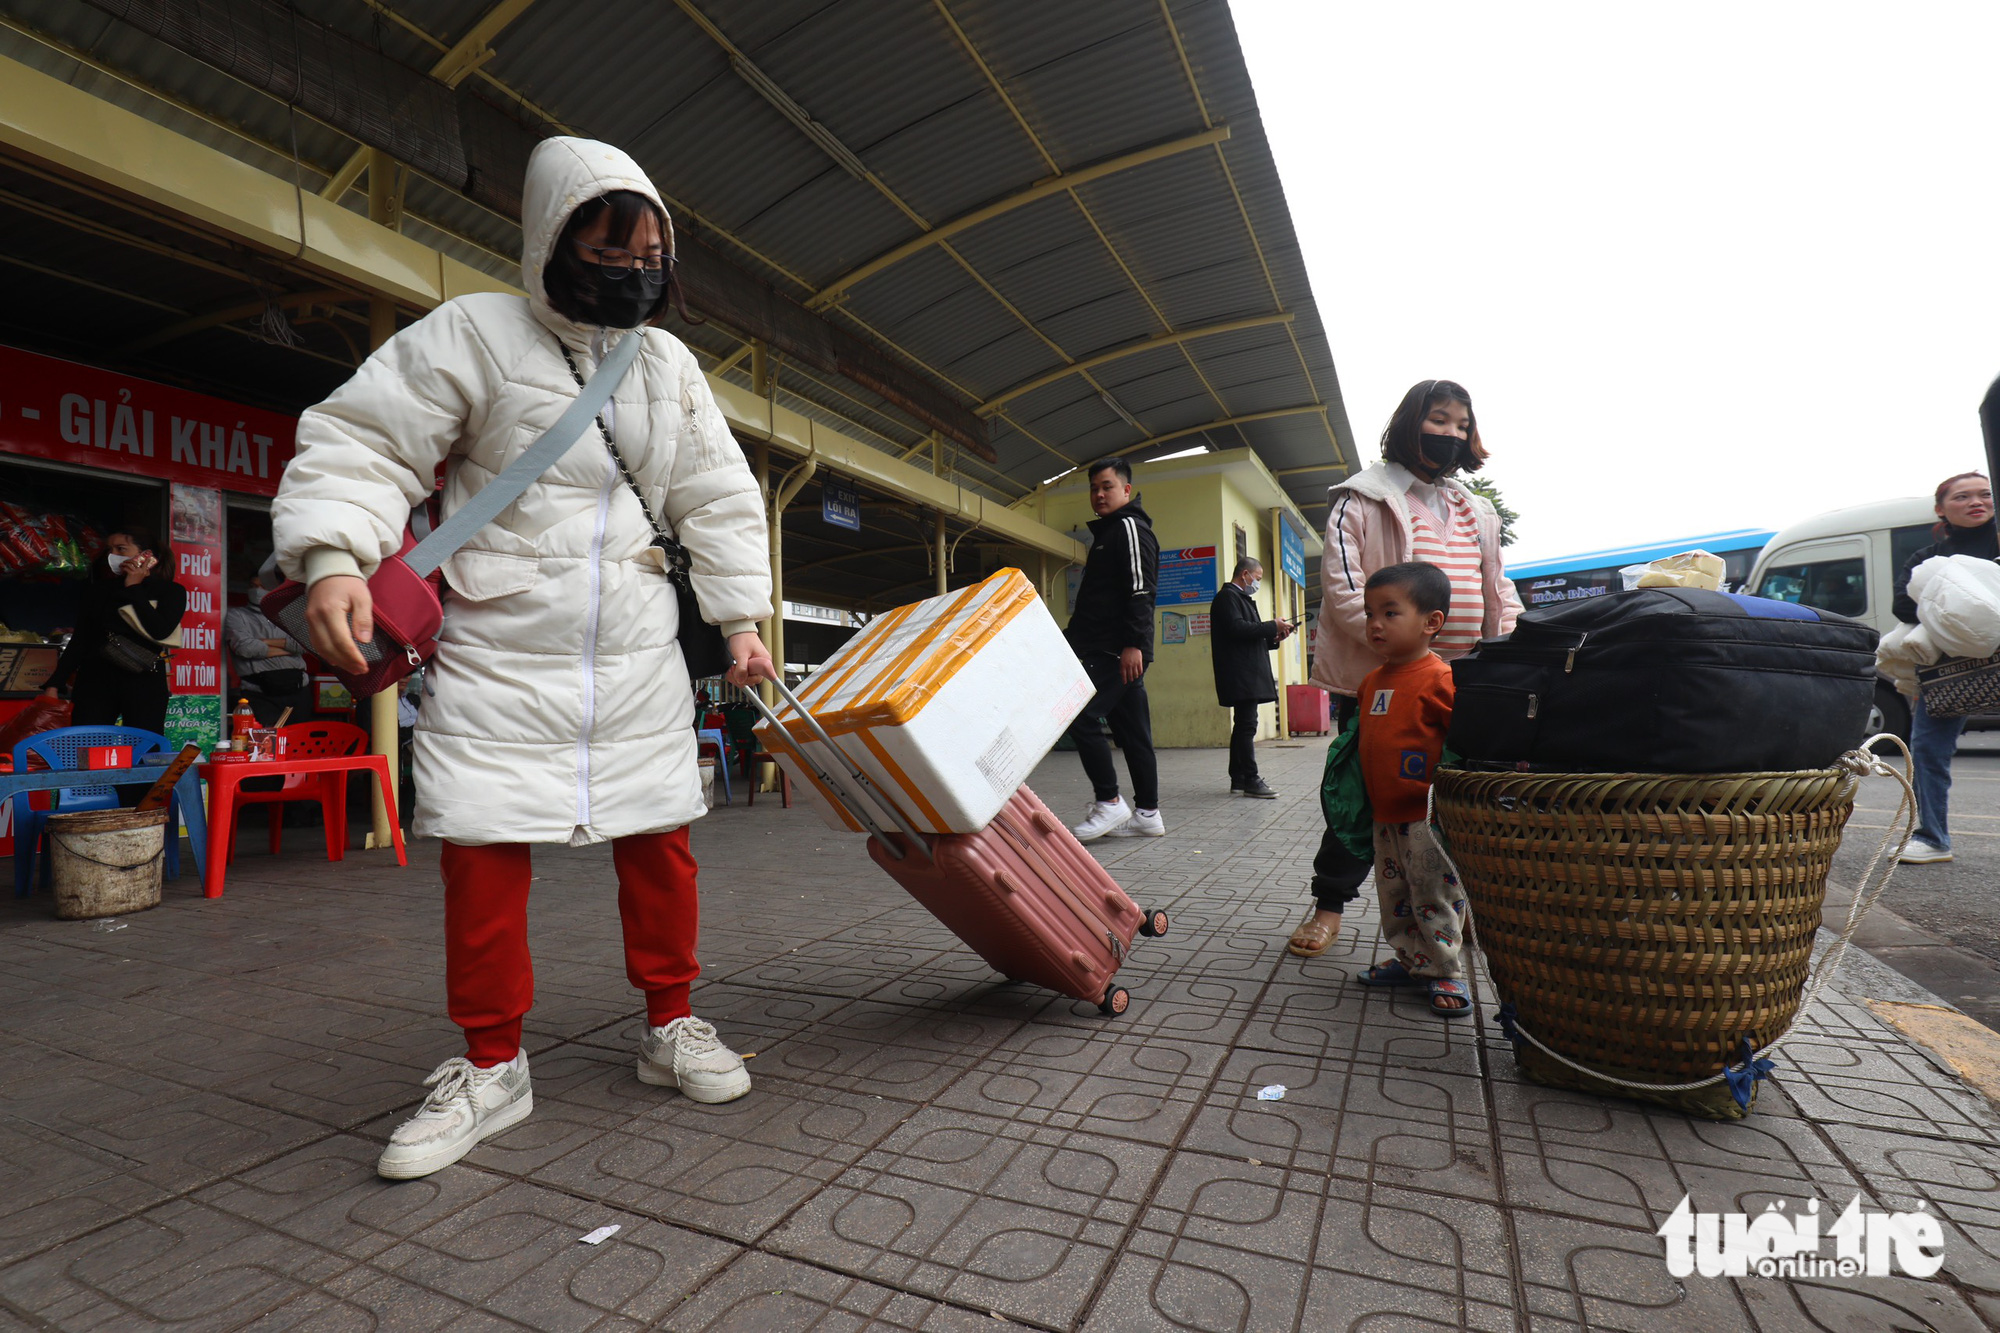 A post-Tet returnee pulls a luggage at a bus station in Hanoi, January 26, 2023. Photo: Nguyen Bao / Tuoi Tre